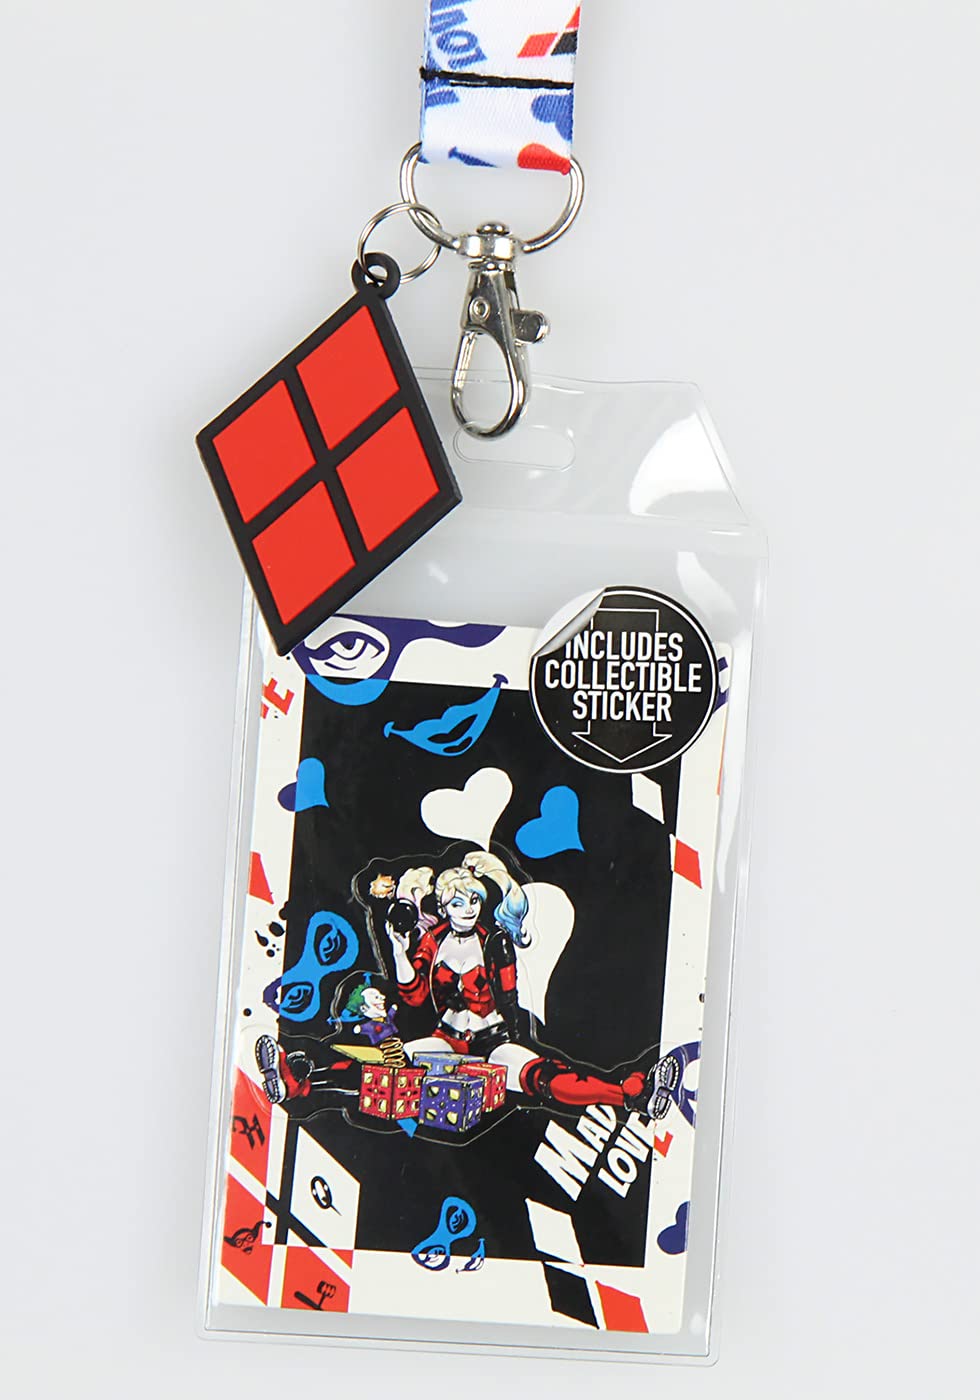 DC Comics Harley Quinn Mad Love Lanyard ID Badge Holder with Collectible Sticker